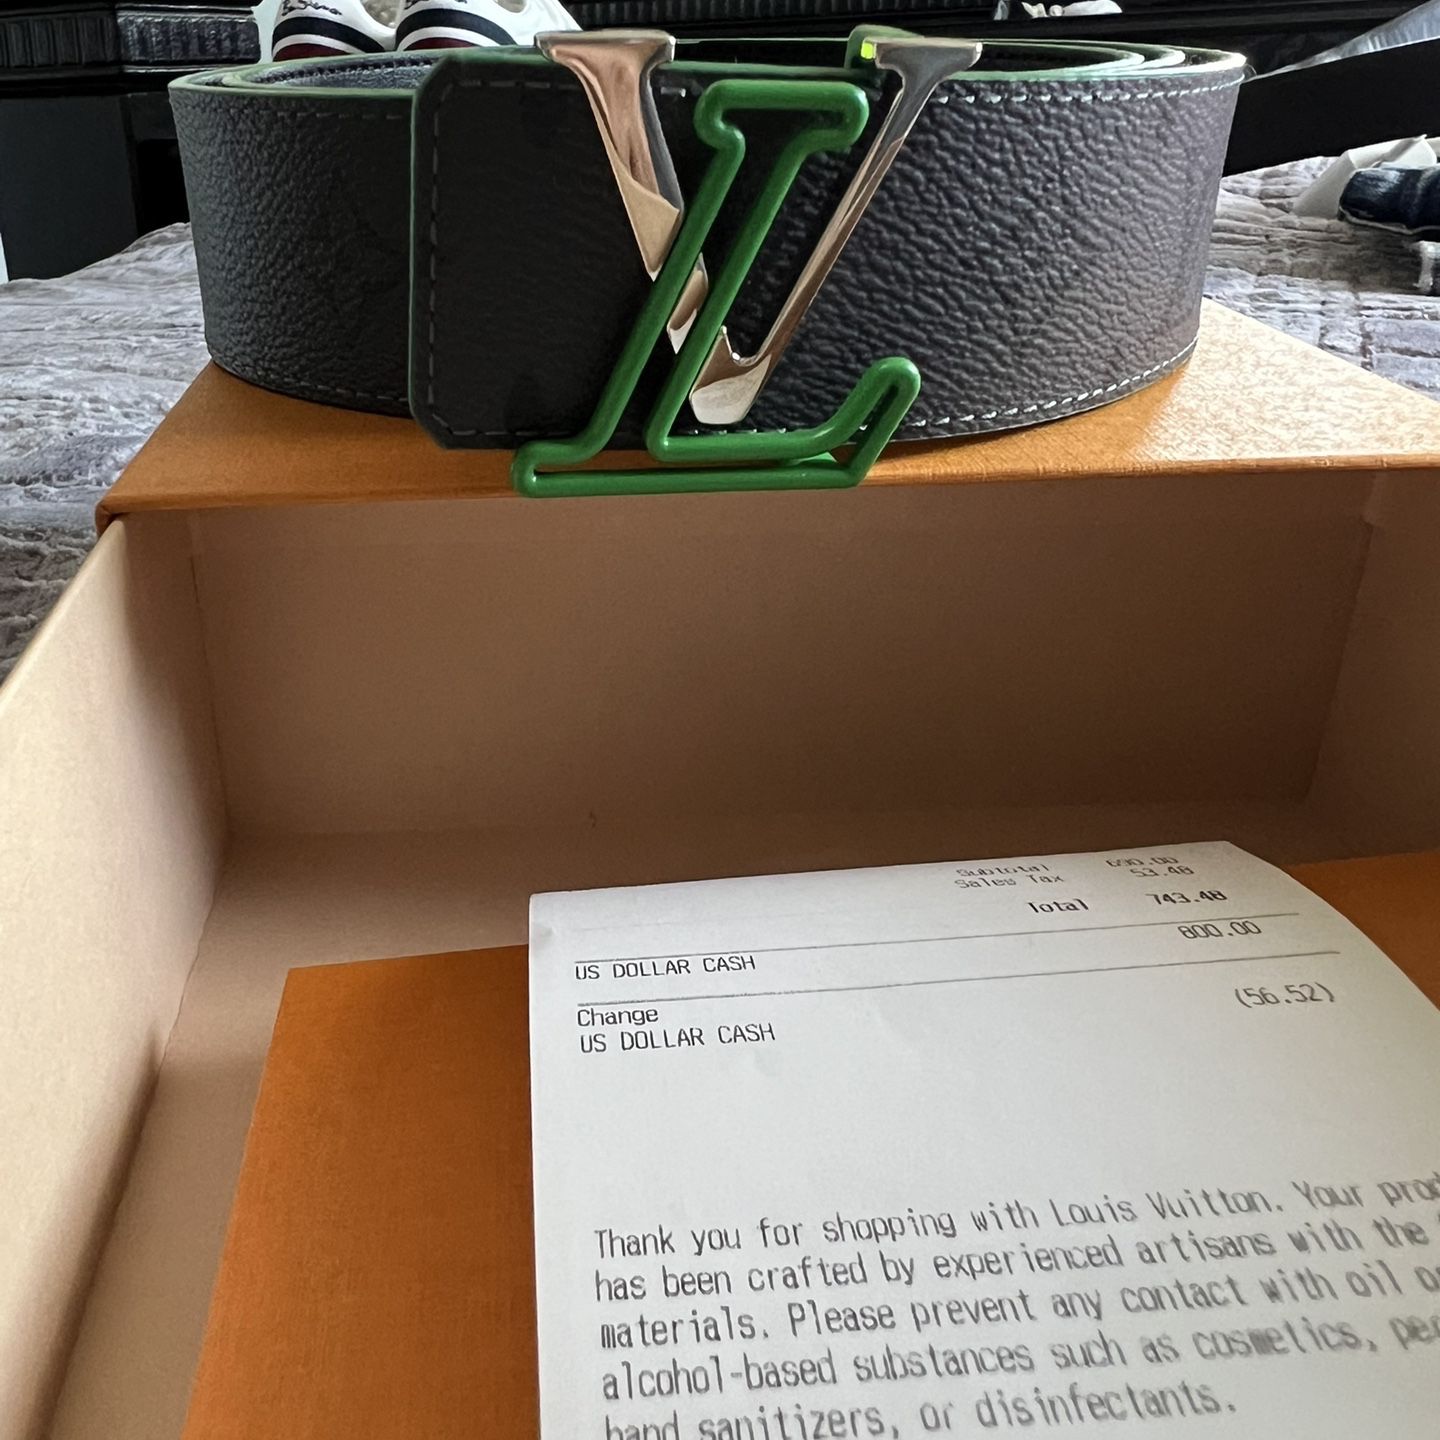 Men's LV Louis Vuitton Belt BRAND NEW Size 42 for Sale in San Mateo, CA -  OfferUp